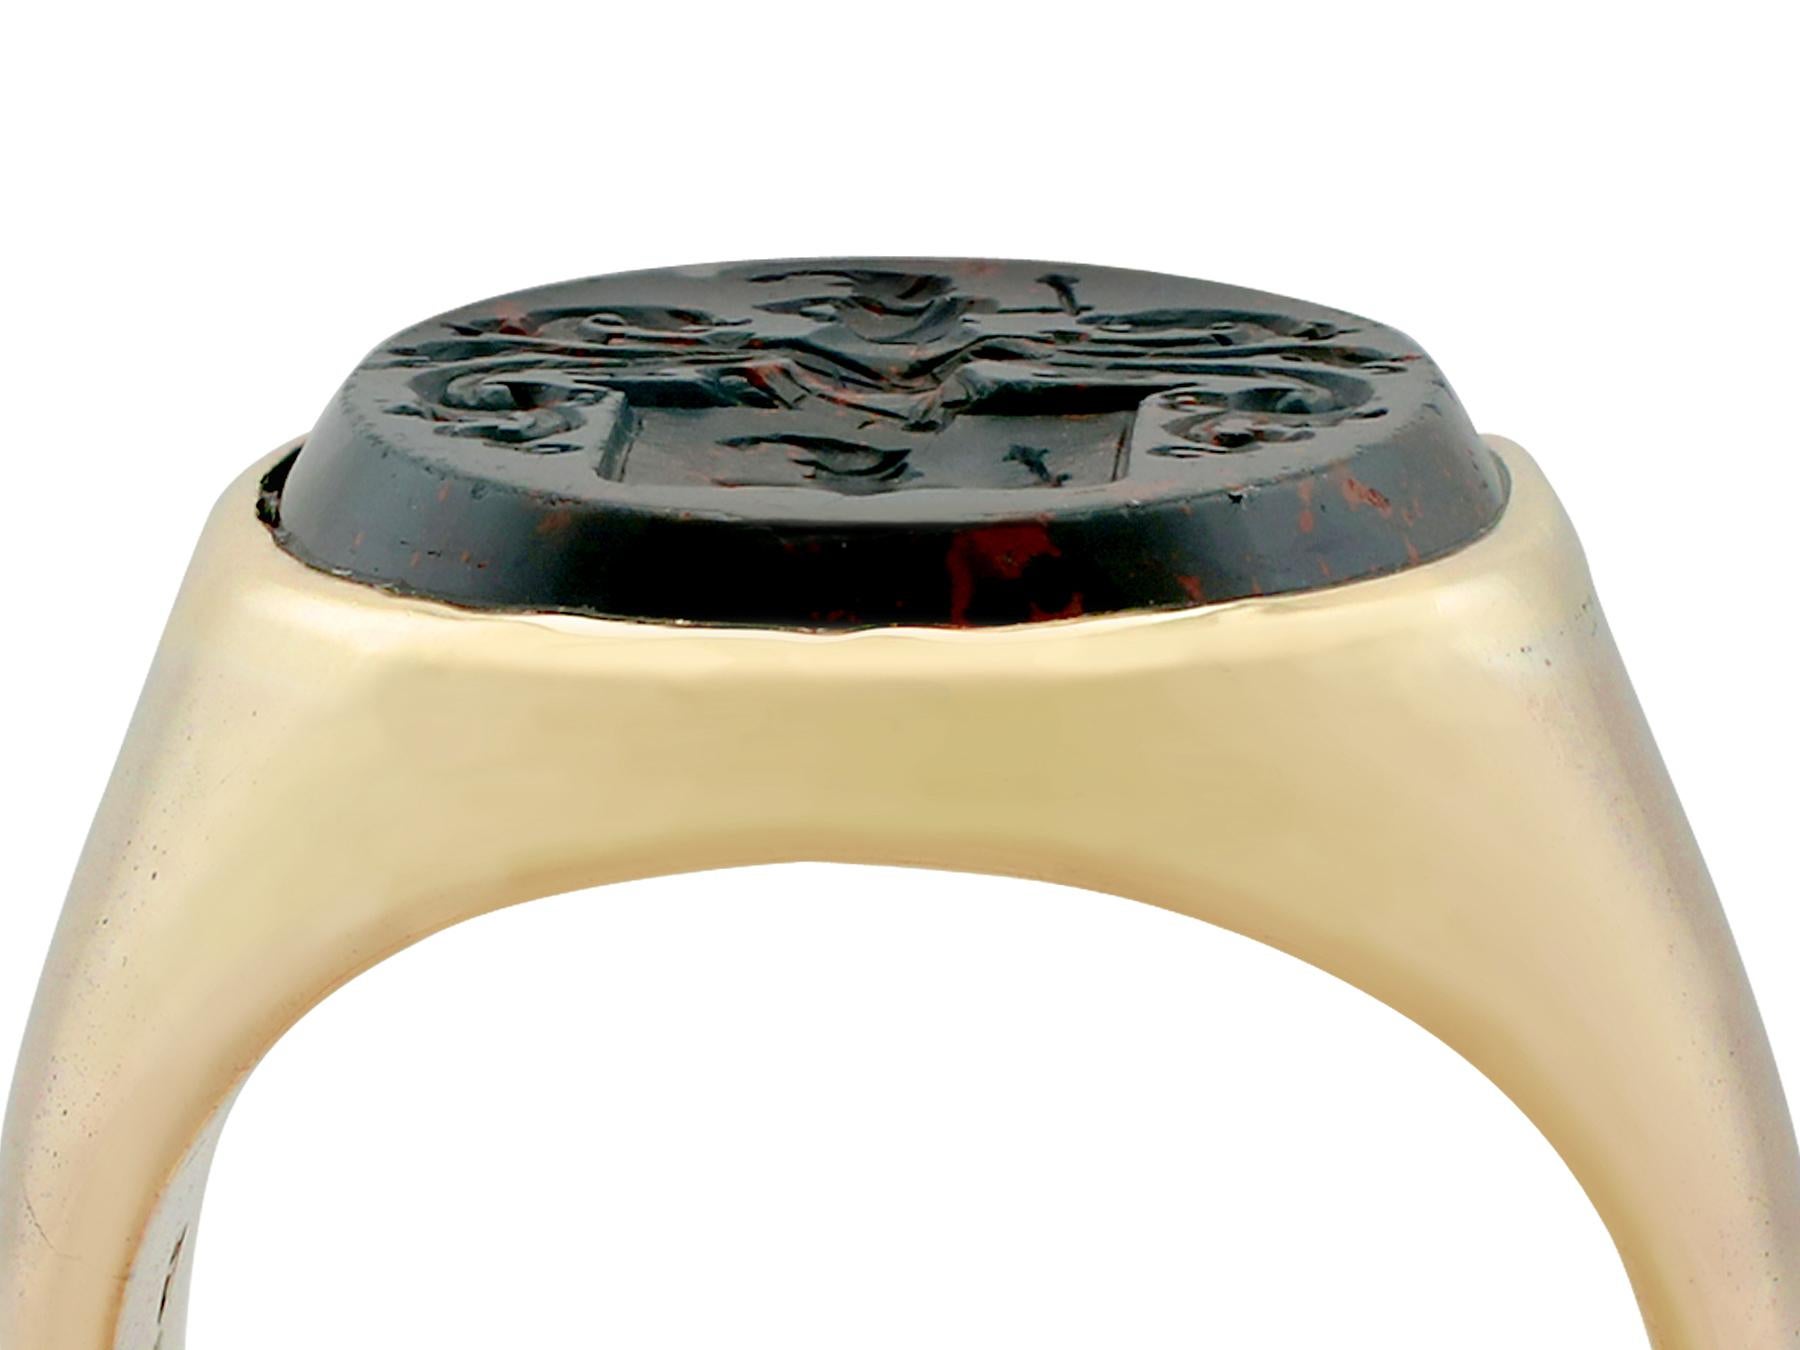 An impressive antique Victorian hardstone and 15 carat yellow gold intaglio signet ring; part of our diverse antique jewelry and estate jewelry collections.

This stunning, fine and impressive Victorian signet ring has been crafted in 15k yellow